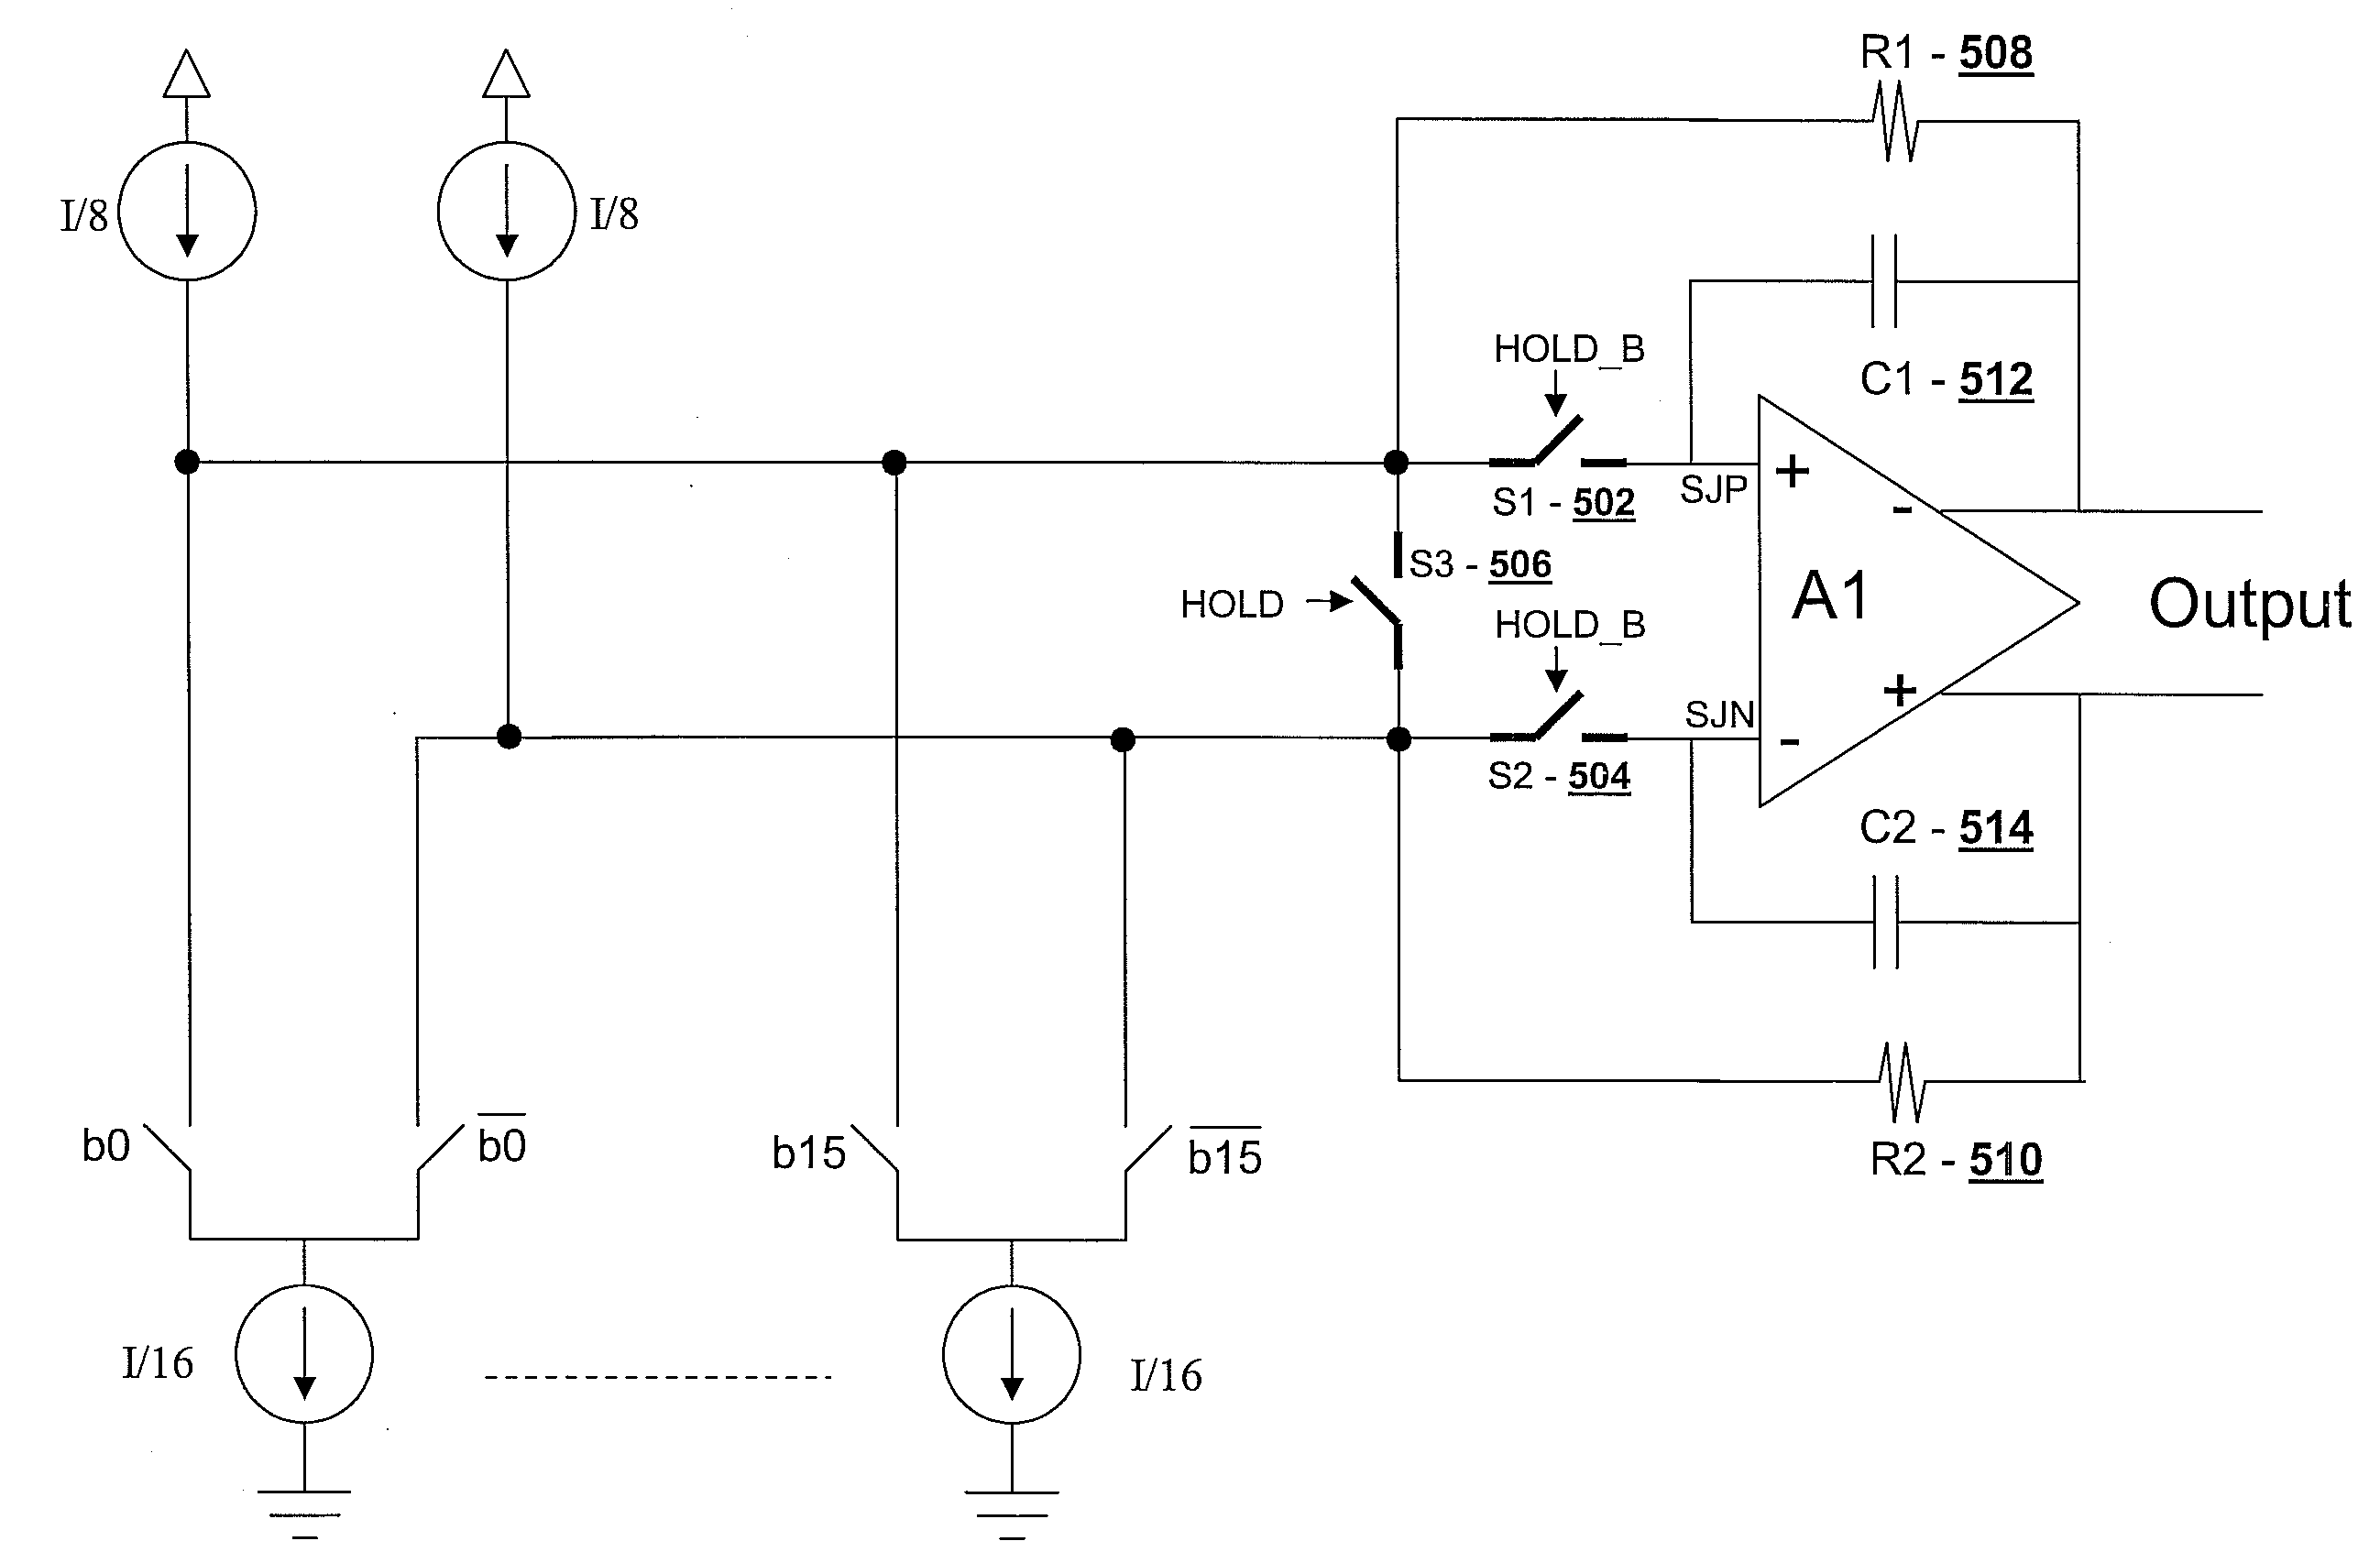 Return-to-hold switching scheme for dac output stage